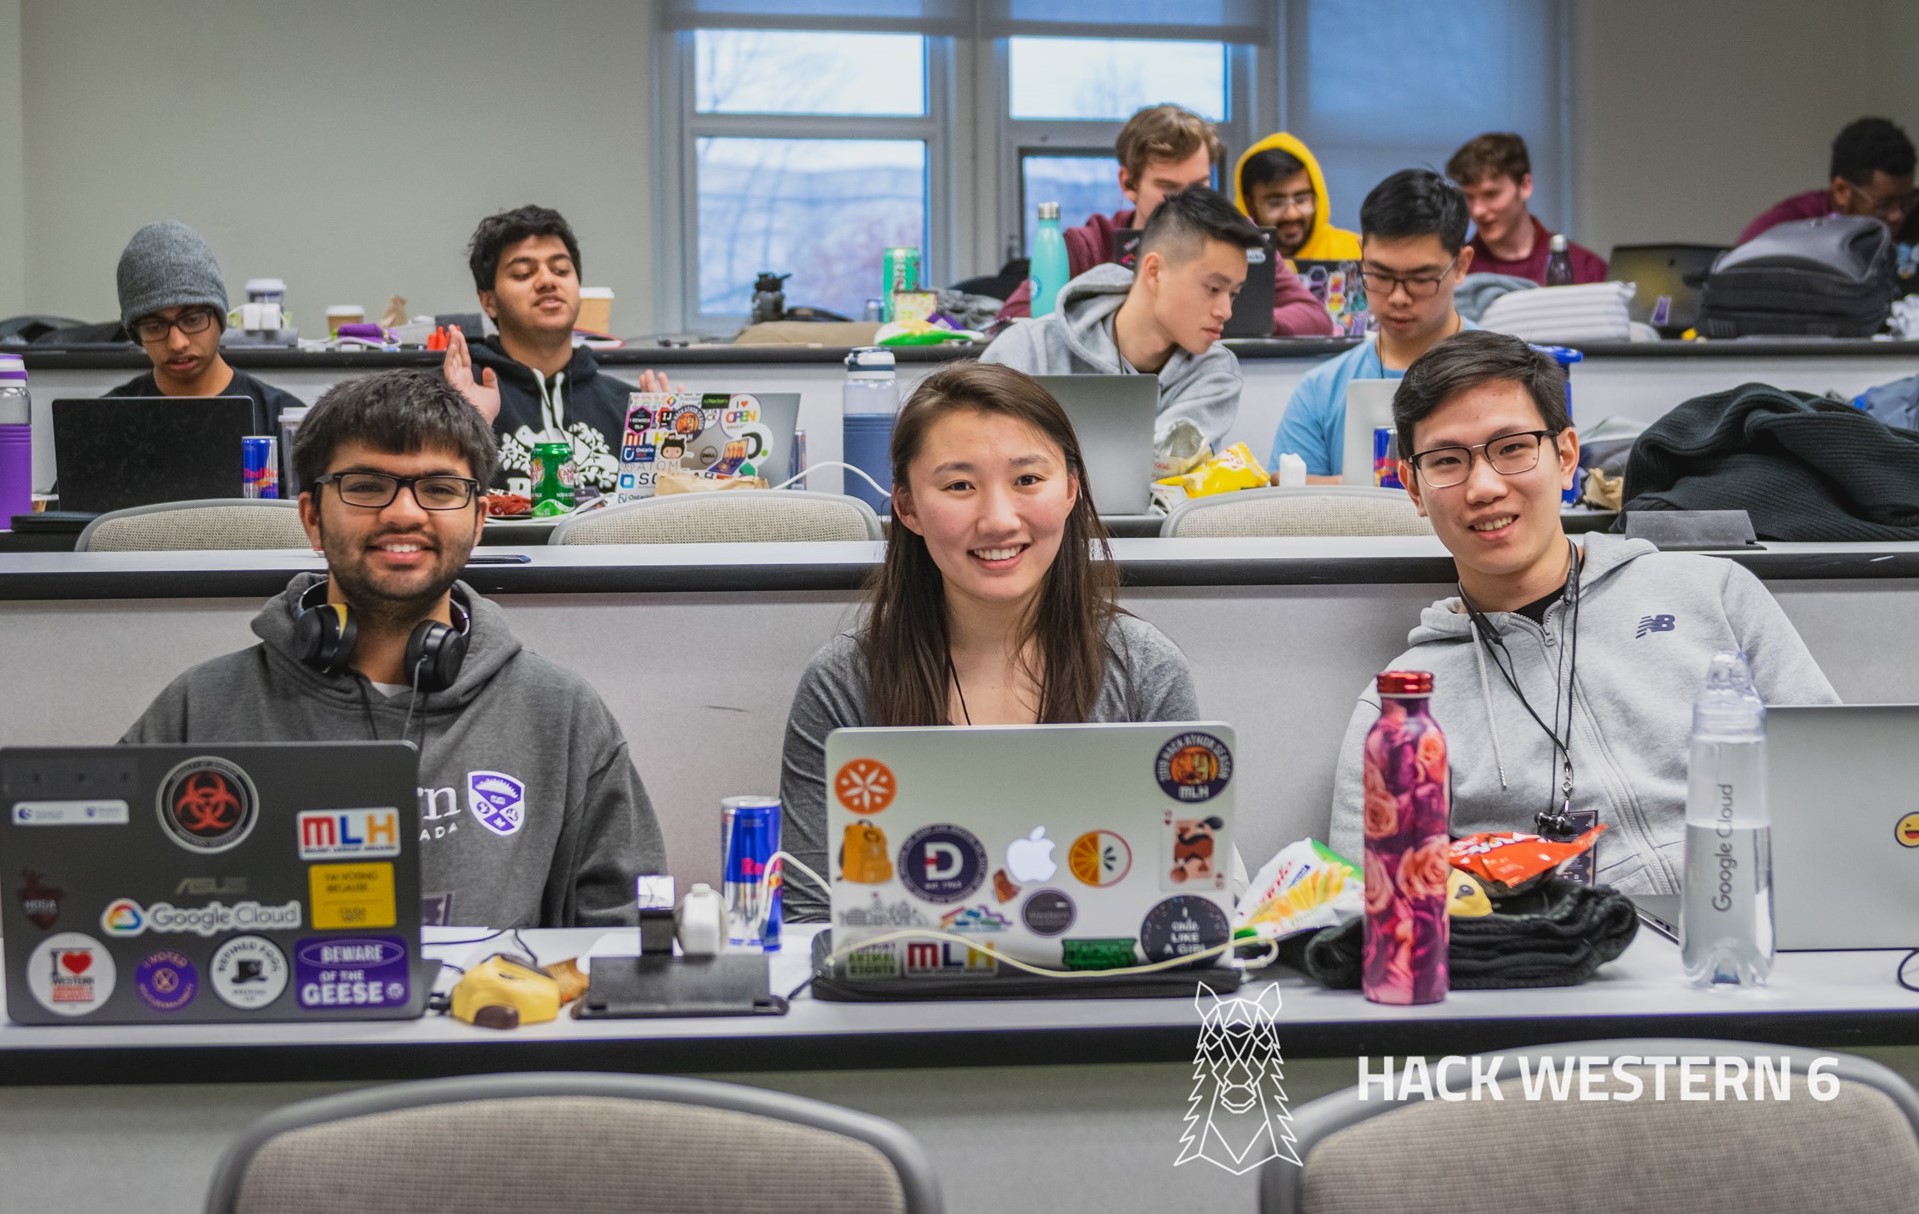 Group of students working on their laptops at the Hack Western 6 event